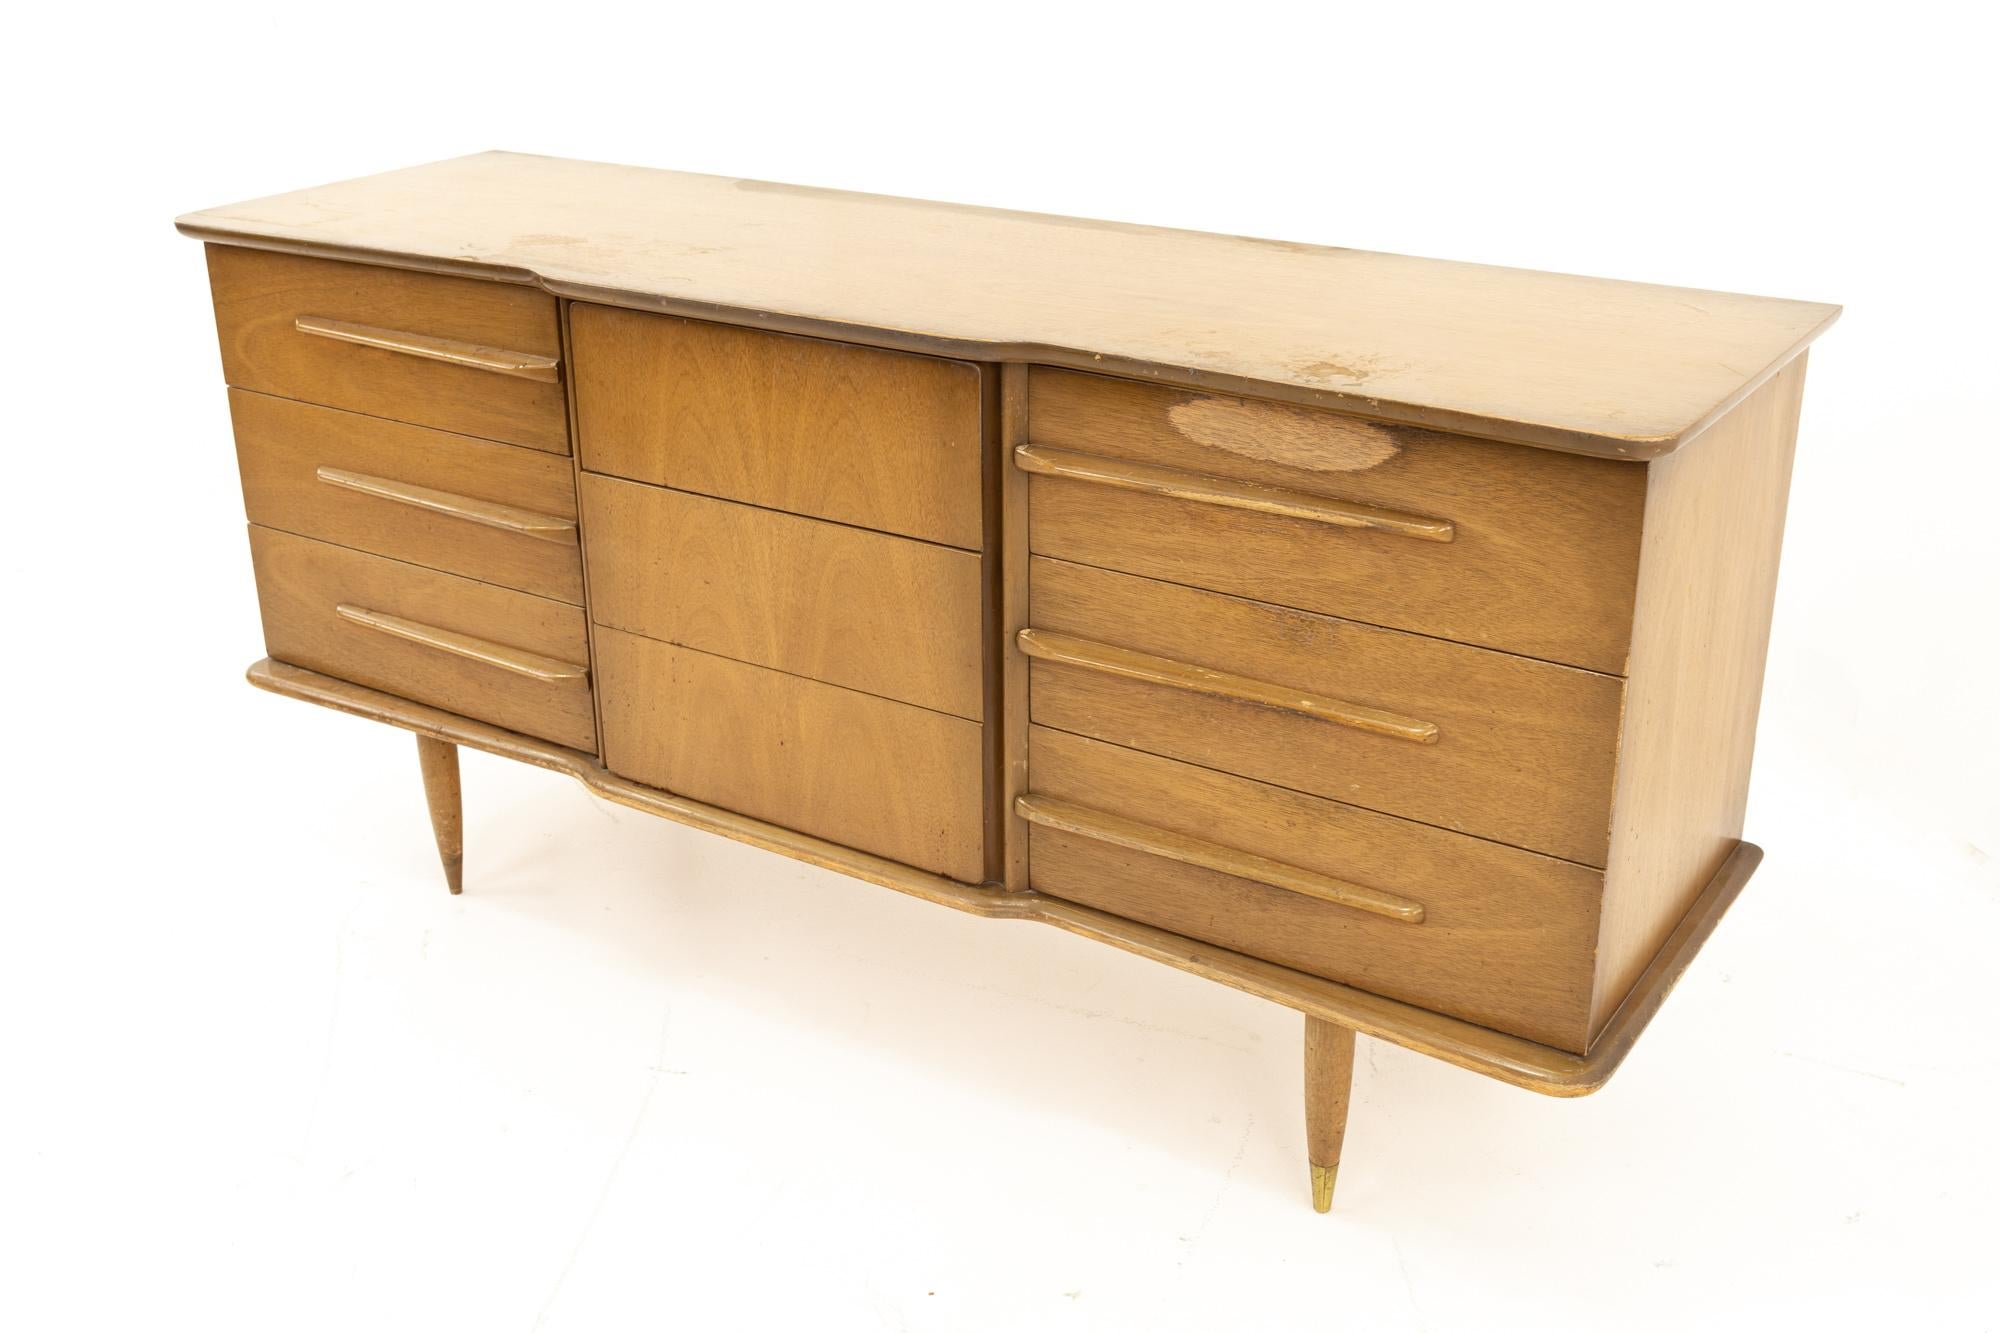 United furniture midcentury walnut 9 drawer lowboy dresser
This dresser is 62 wide x 19 deep x 30 inches high

All pieces of furniture can be had in what we call restored vintage condition. That means the piece is restored upon purchase so it’s